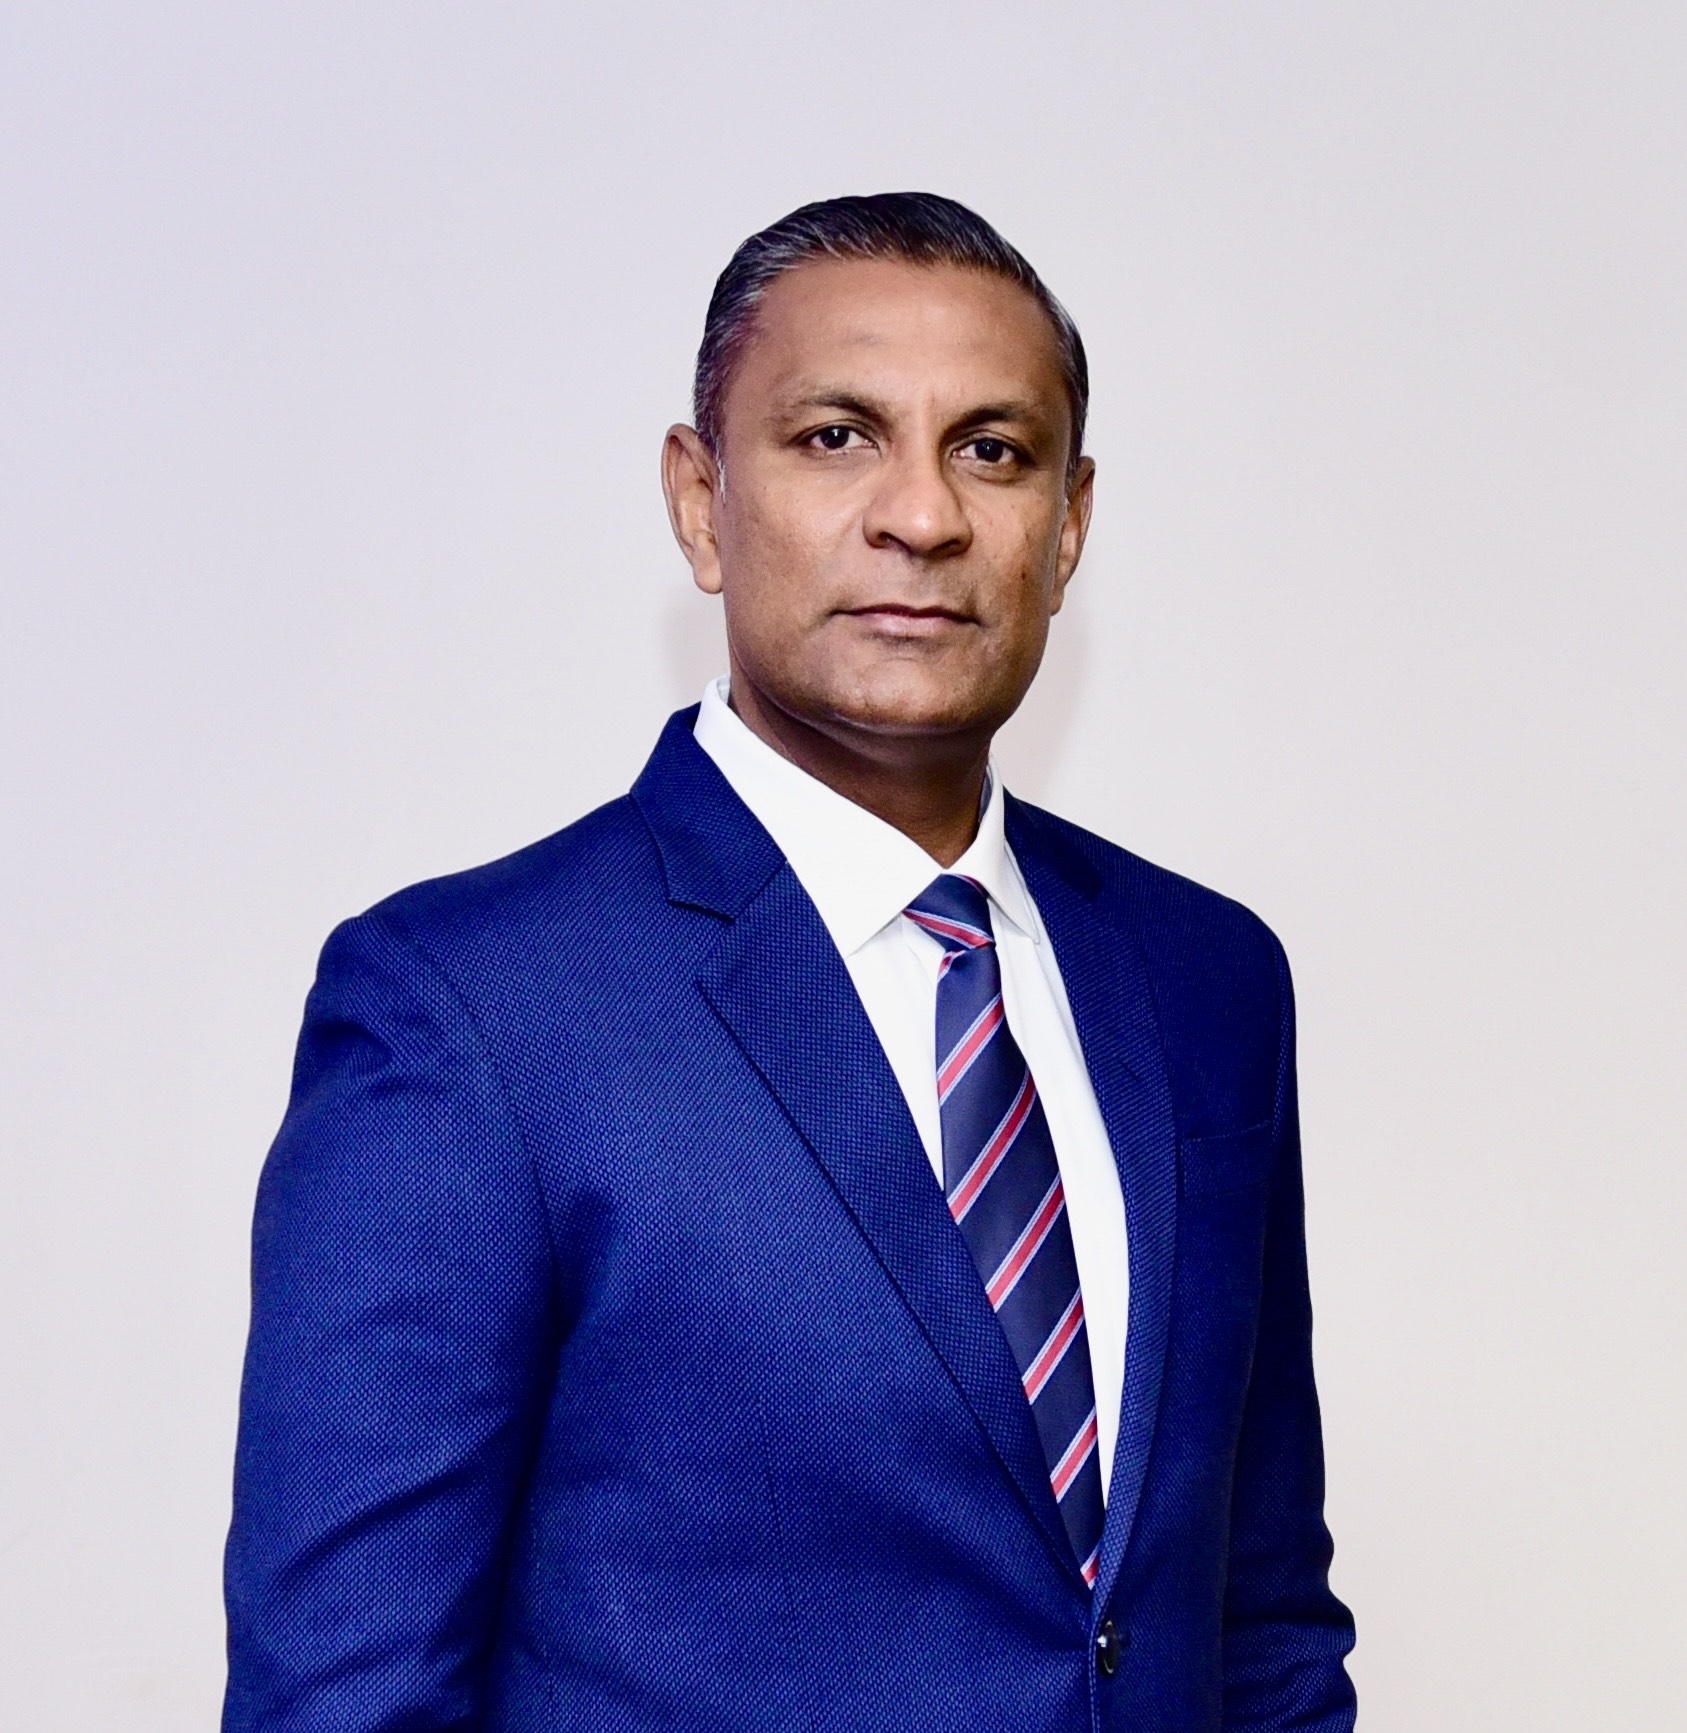 People’s Insurance PLC Appoints Mr. Dennis Hewagama as Chief Sales Officer